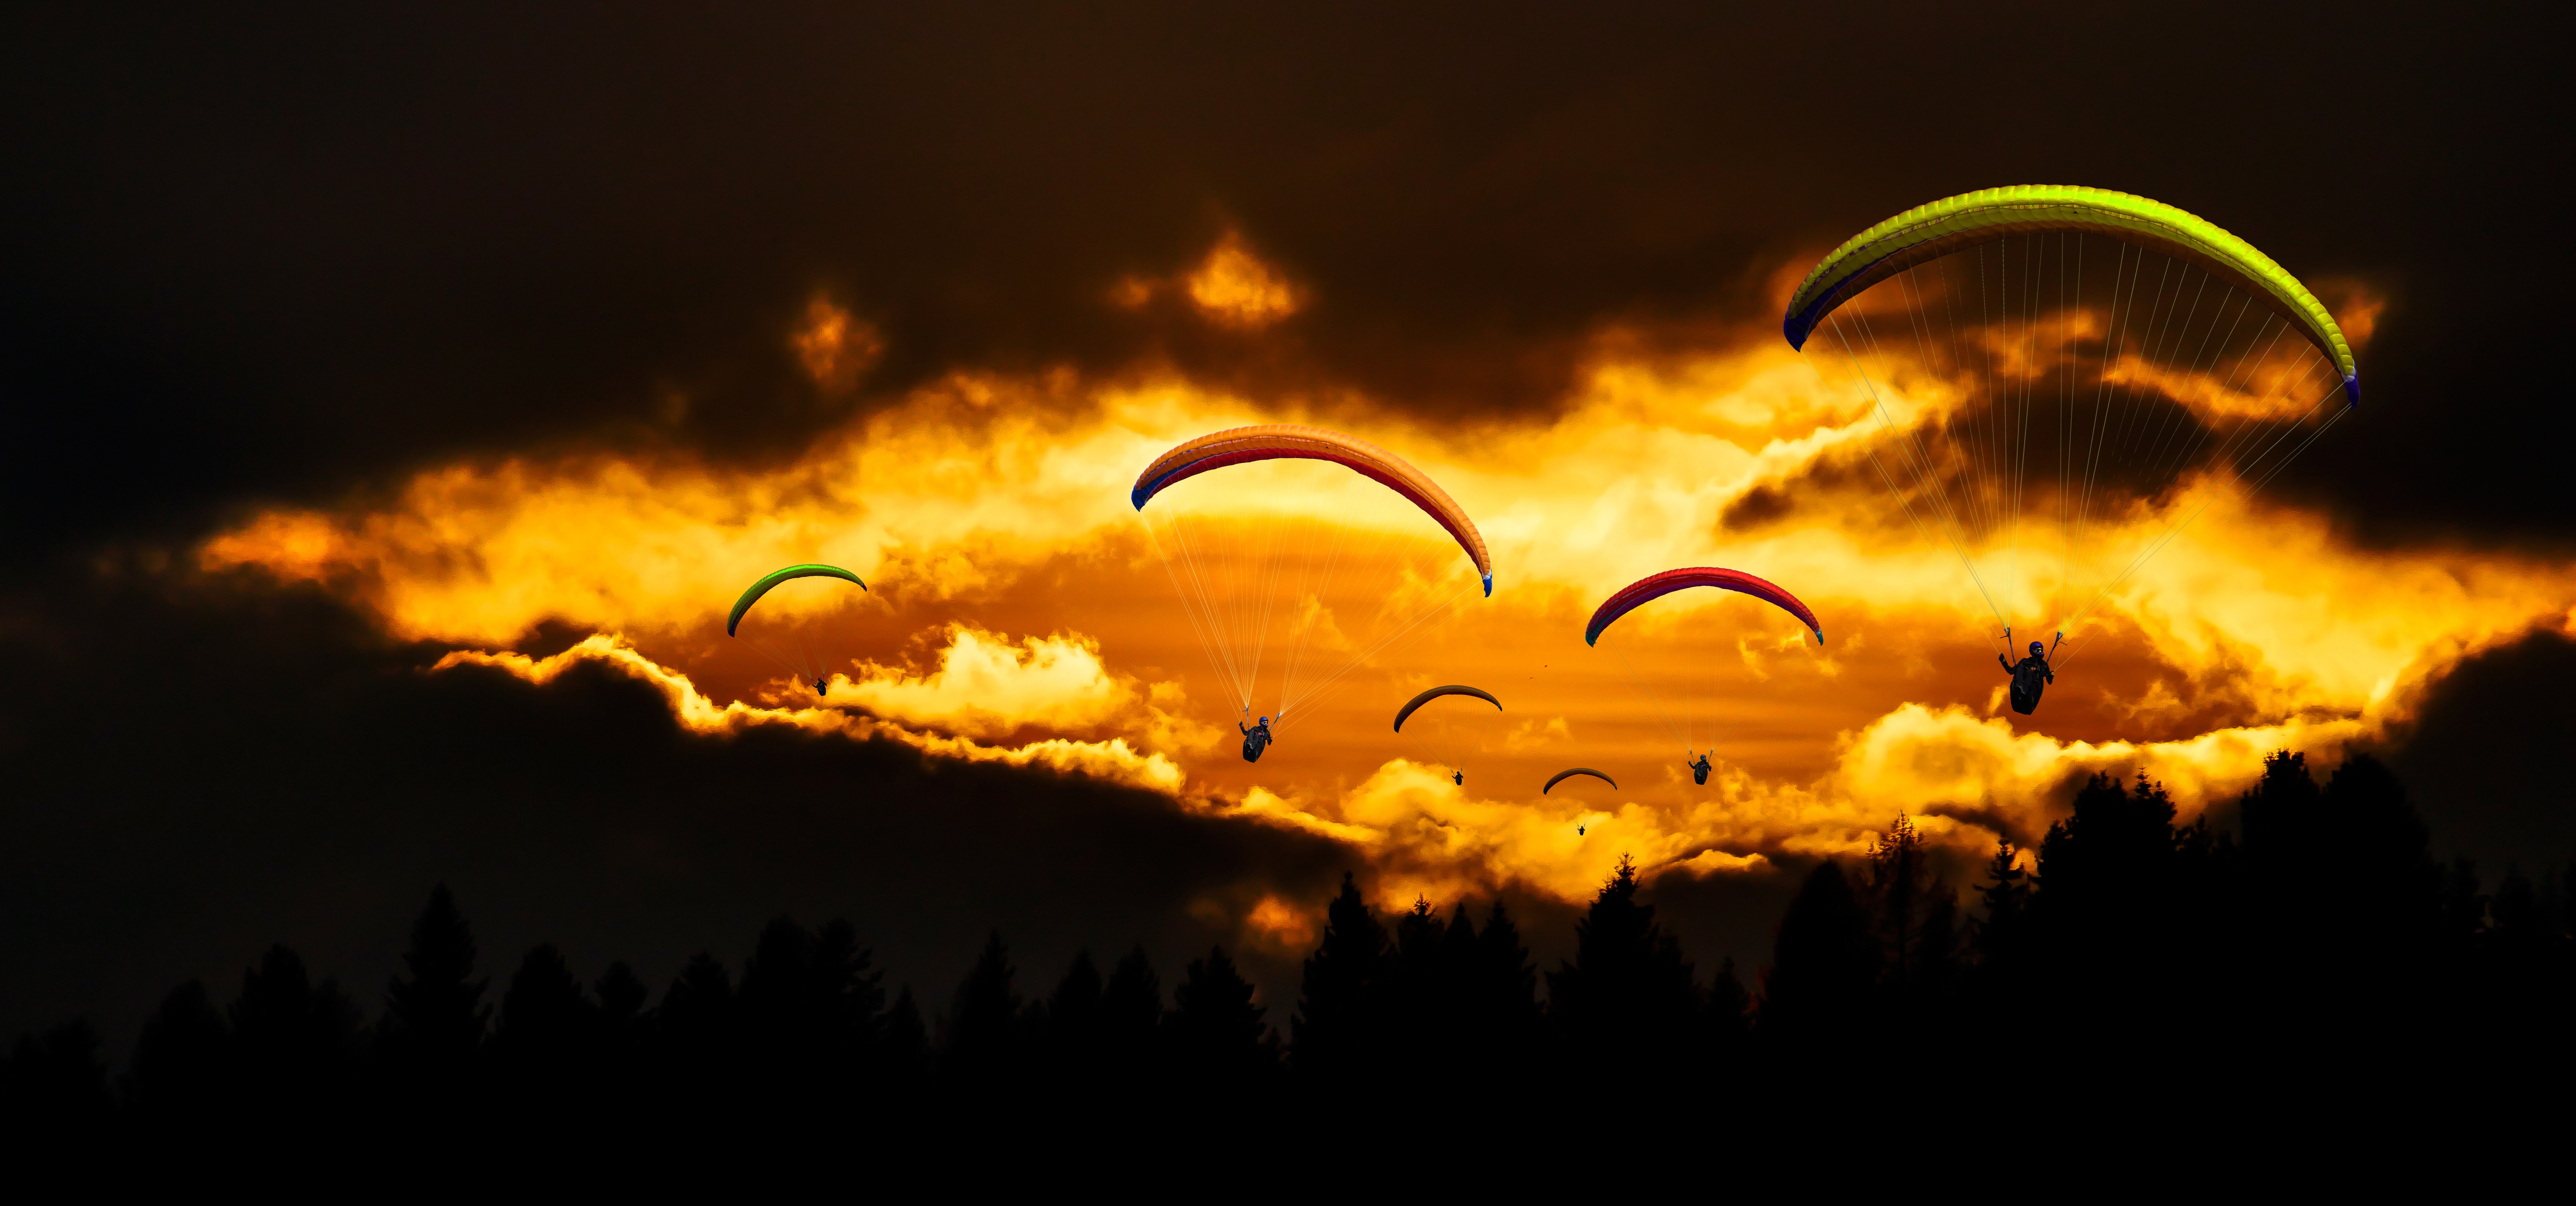 People in mid air using parachute in dusk photo